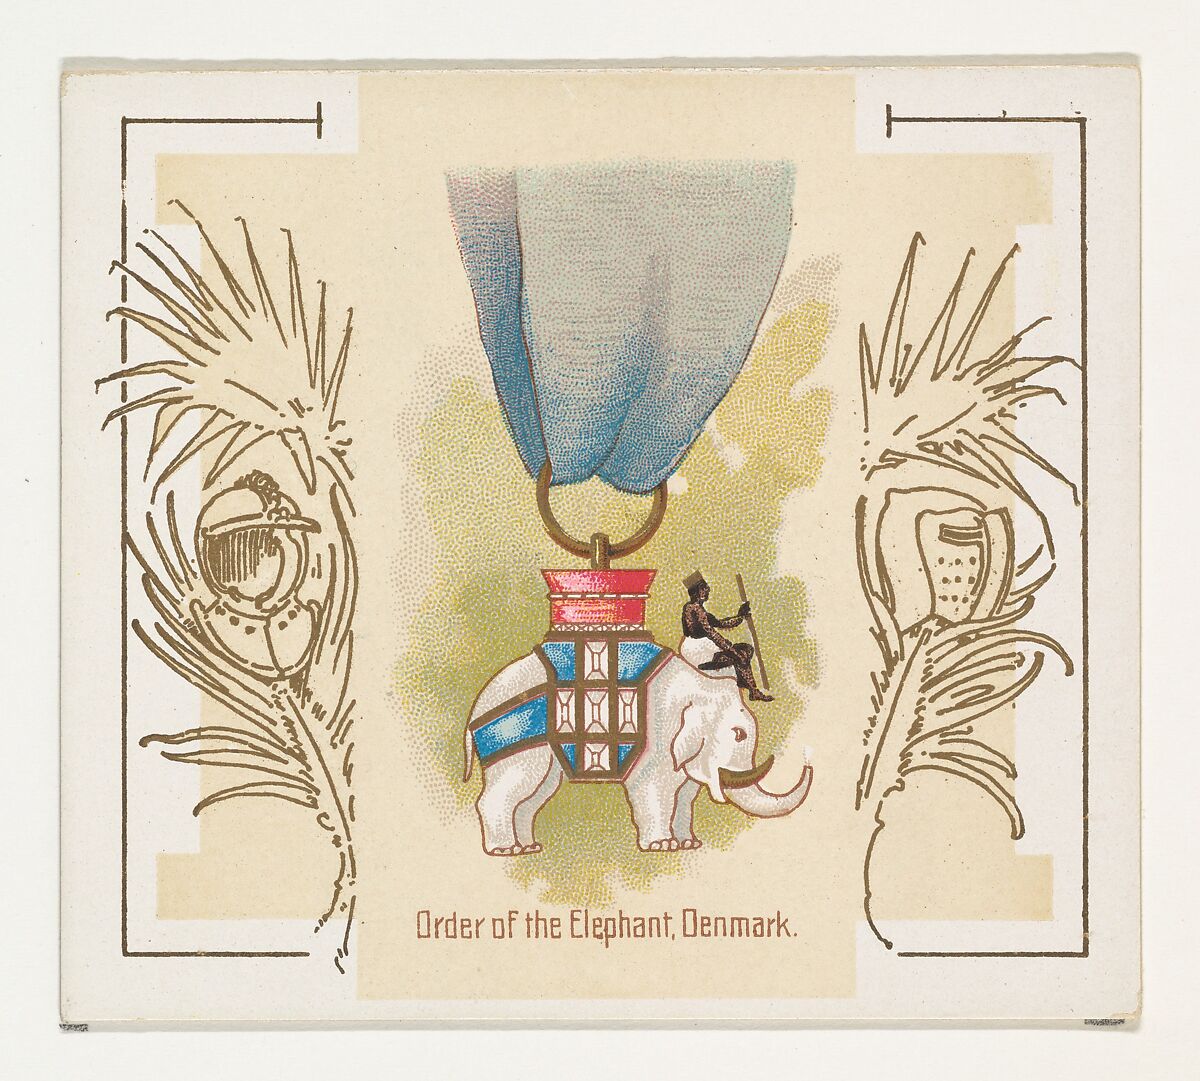 Order of the Elephant, Denmark, from the World's Decorations series (N44) for Allen & Ginter Cigarettes, Issued by Allen &amp; Ginter (American, Richmond, Virginia), Commercial color lithograph 